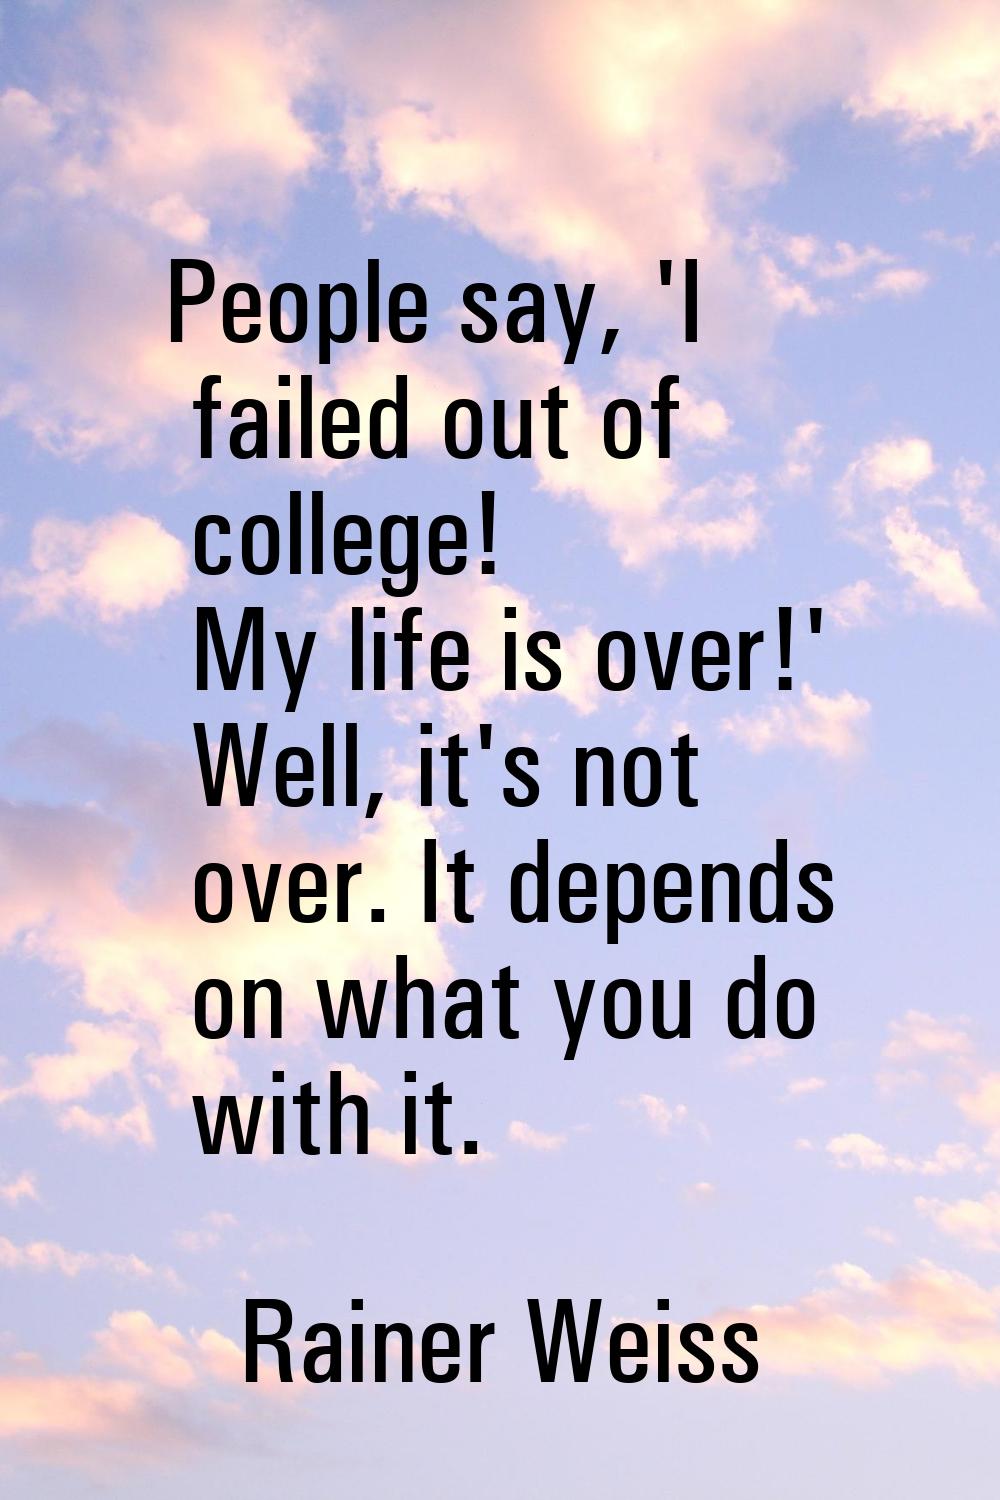 People say, 'I failed out of college! My life is over!' Well, it's not over. It depends on what you